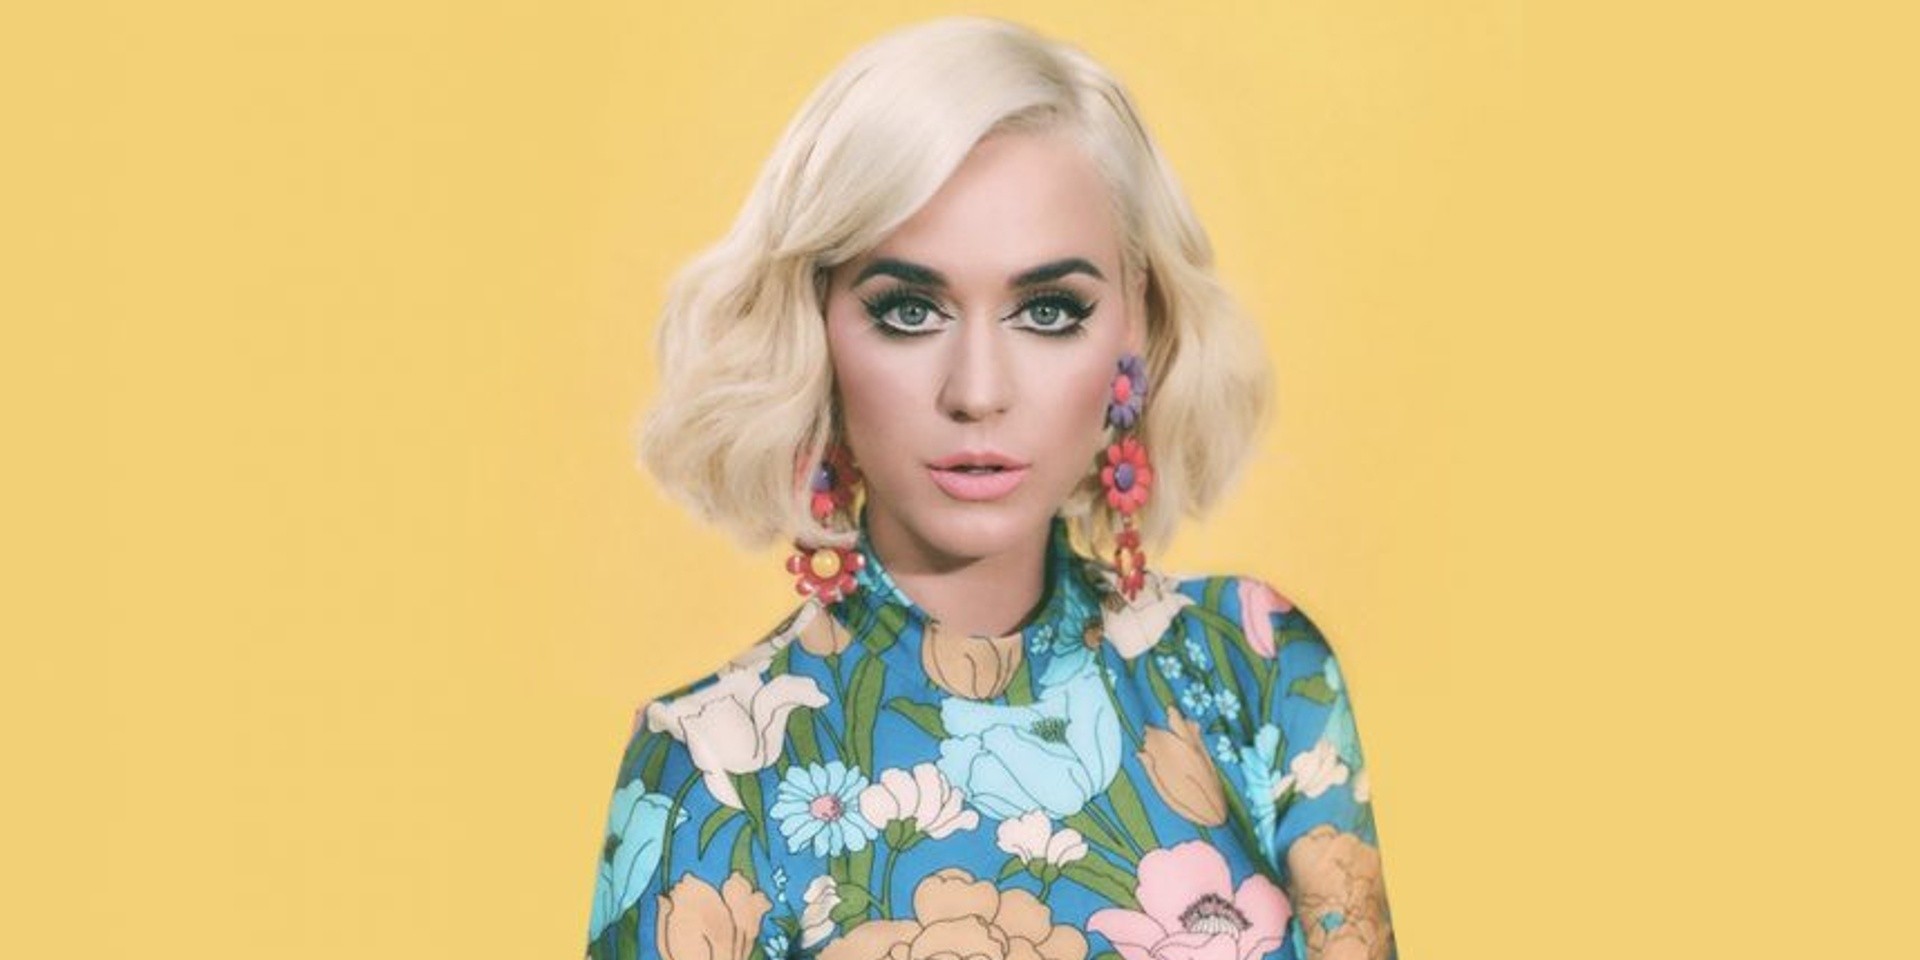 Katy Perry releases tropical new single and music video 'Harleys in Hawaii'